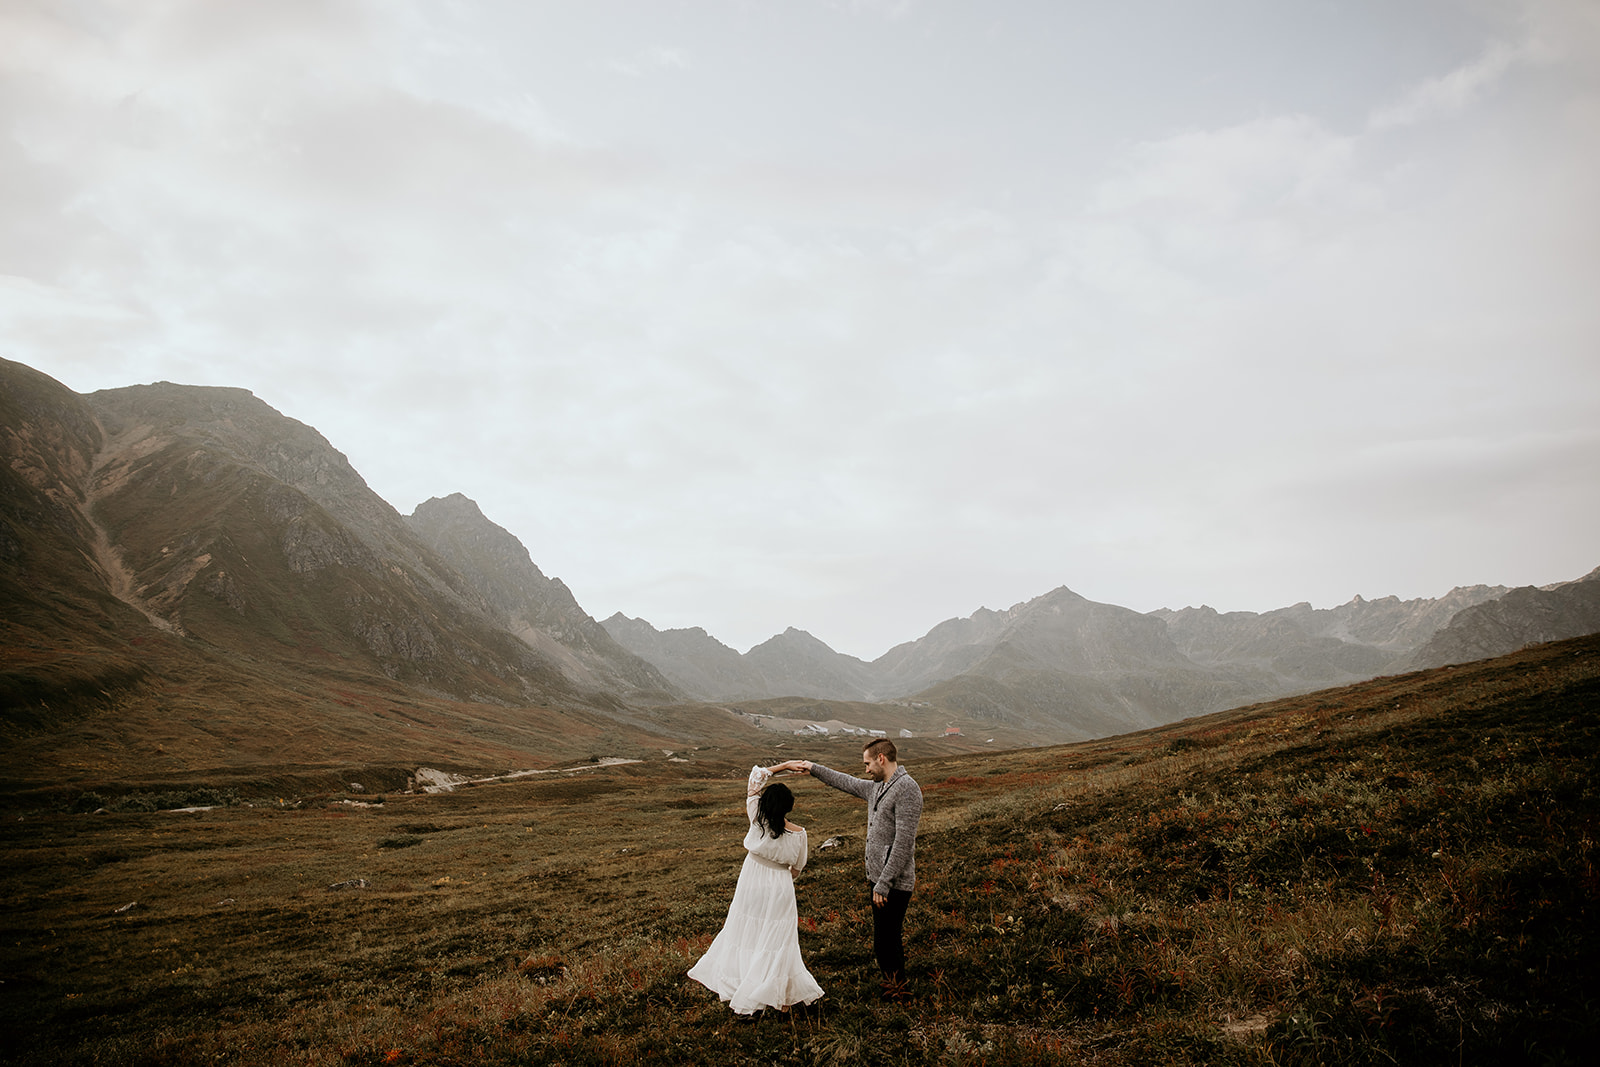 Bride and groom at their elopement in the mountains of Alaska.